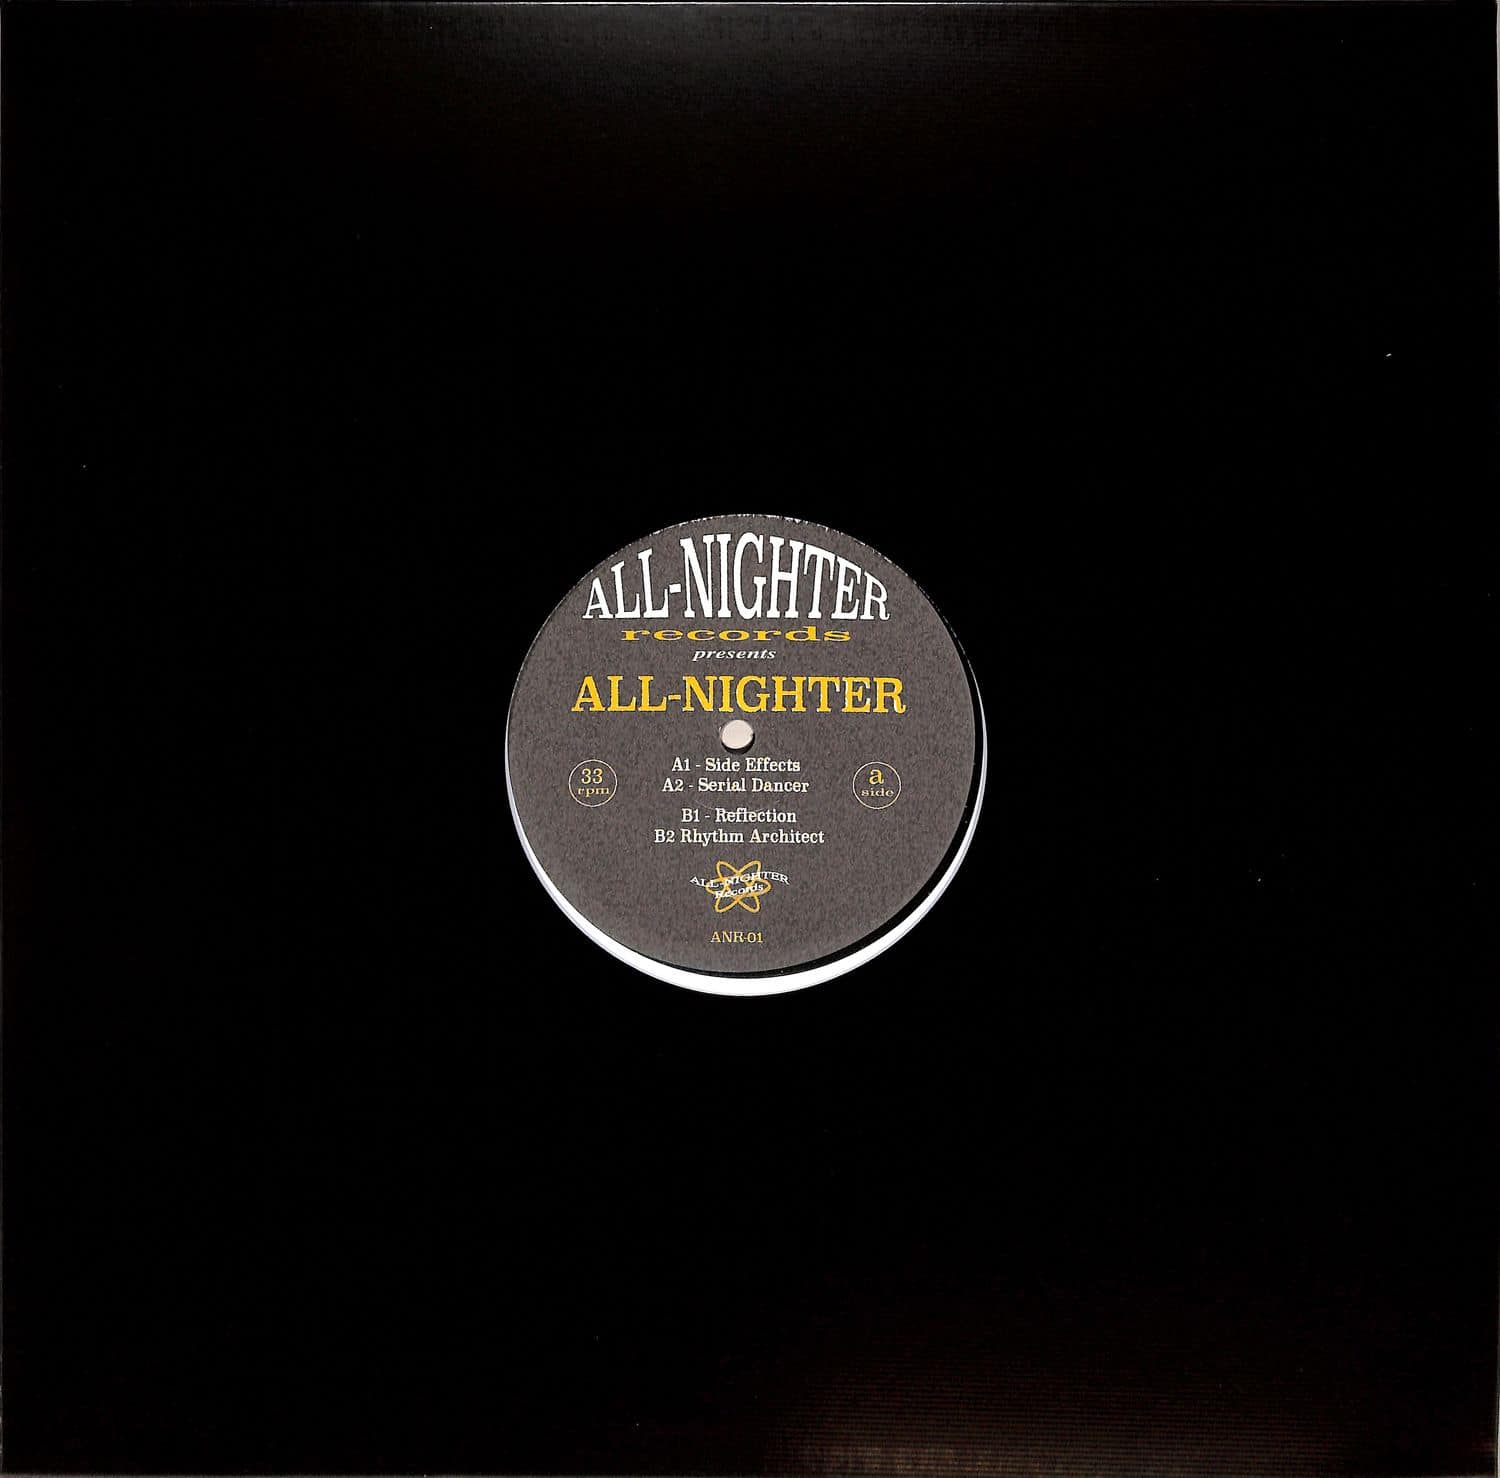 All-Nighter - NITE GROOVES EP